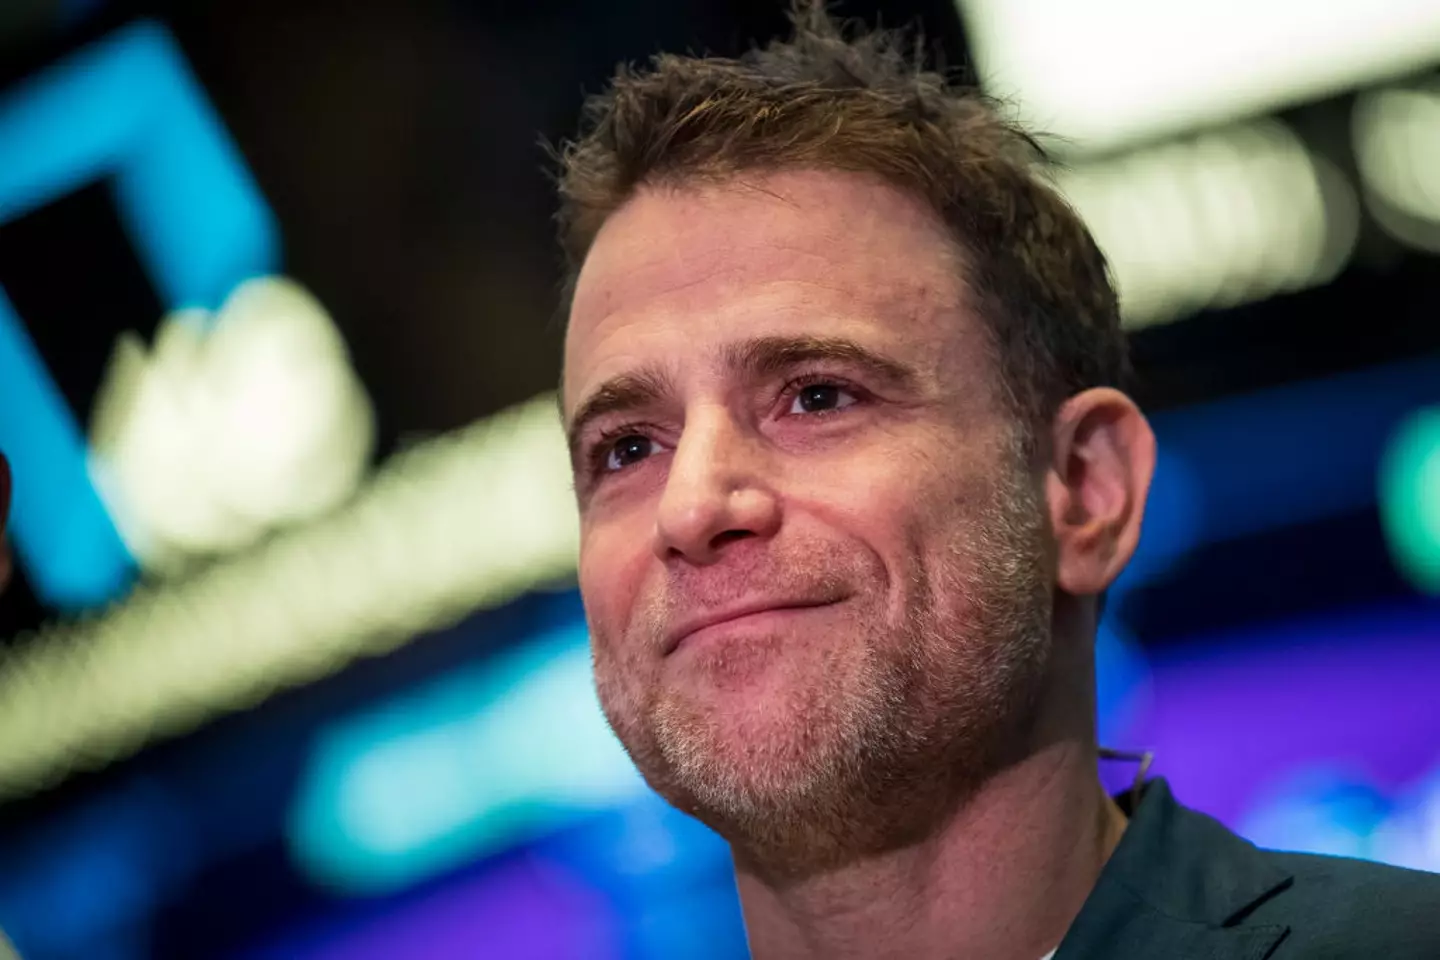 The child's father is Slack co-founder, Stewart Butterfield. (Drew Angerer / Staff / Getty Images)